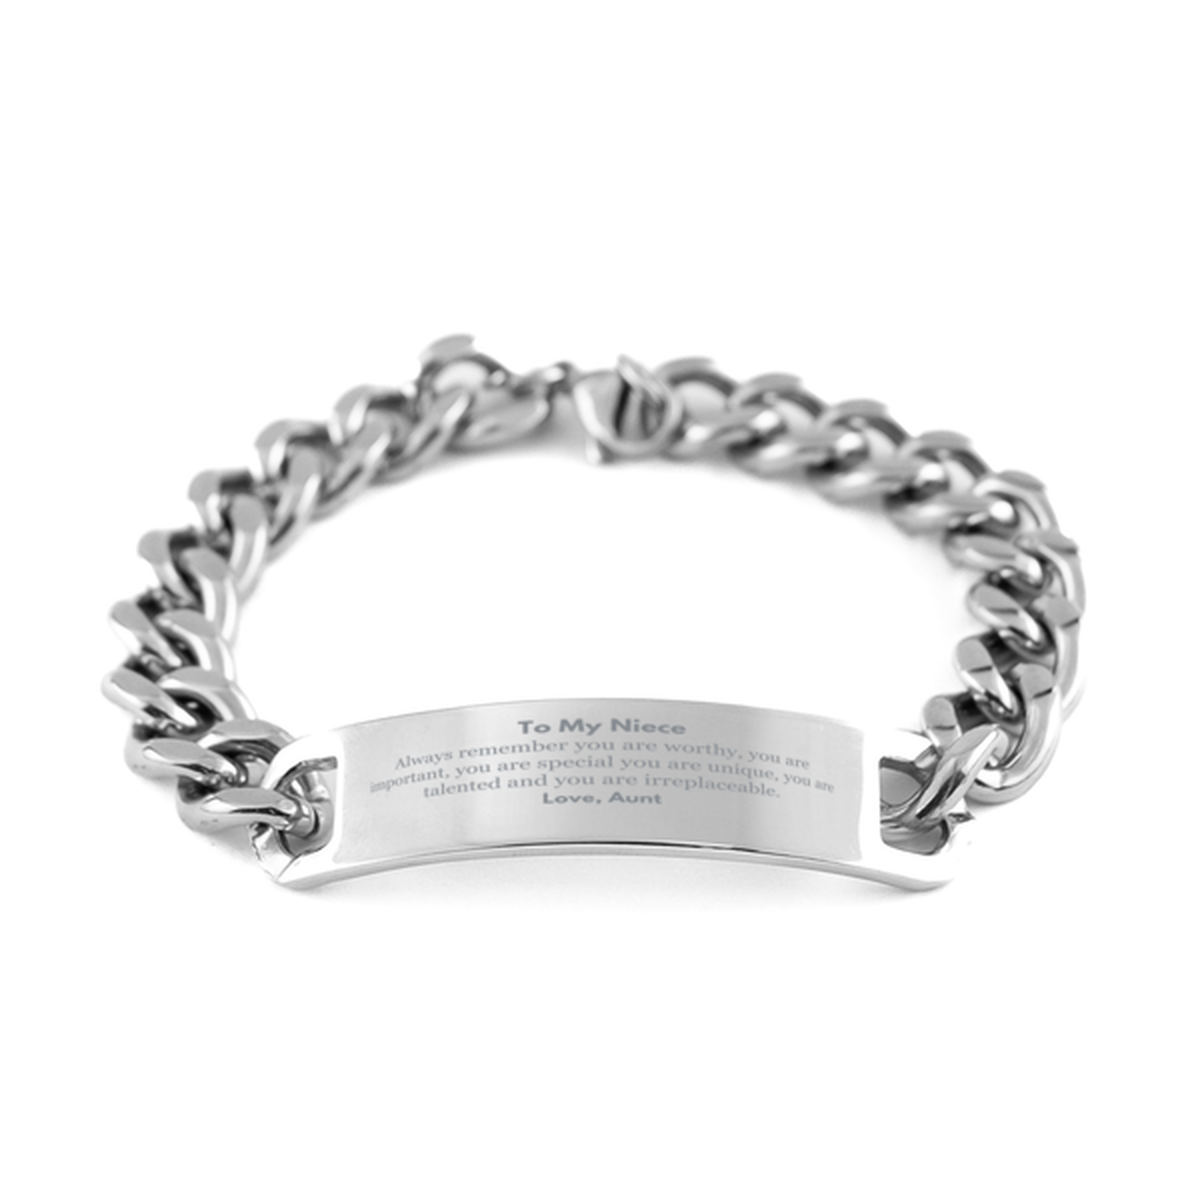 Niece Birthday Gifts from Aunt, Inspirational Cuban Chain Stainless Steel Bracelet for Niece Christmas Graduation Gifts for Niece Always remember you are worthy, you are important. Love, Aunt